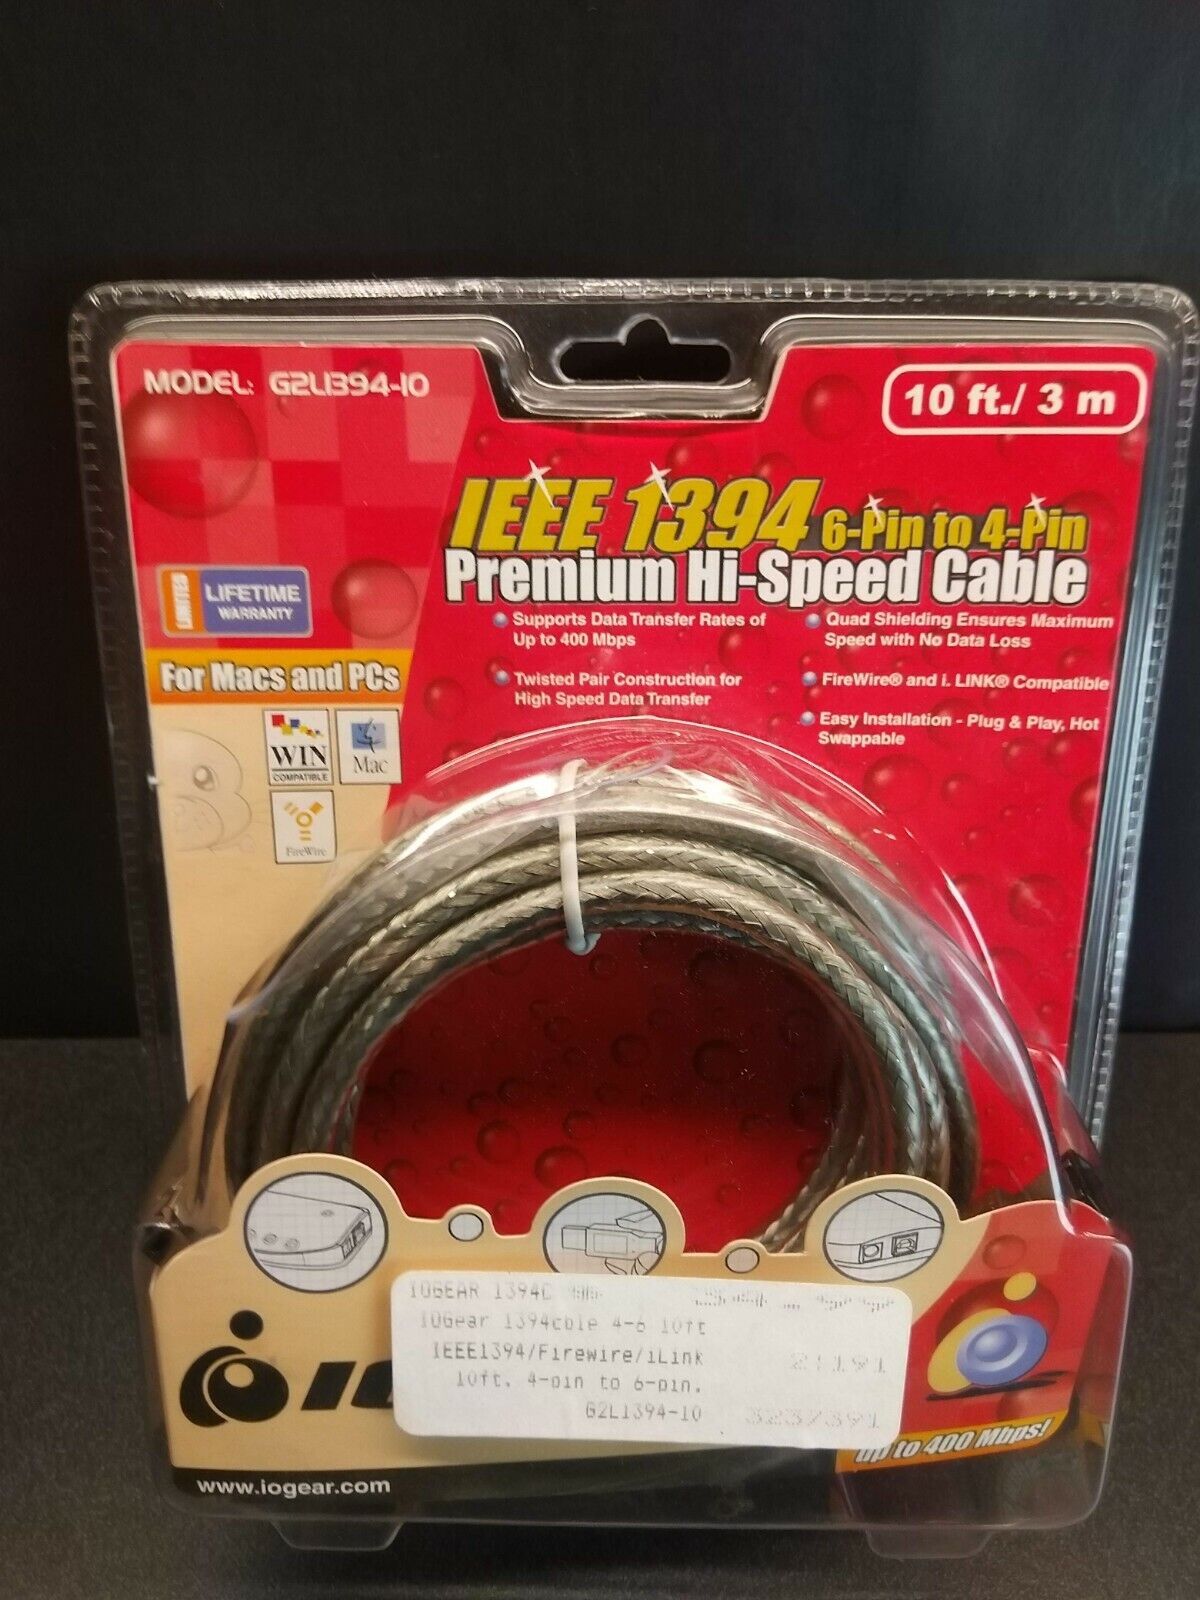 IOGear IEEE 1394 6-pin to 4-pin cable Premium Hi-Speed Cable (400Mbps) 10 ft./3m